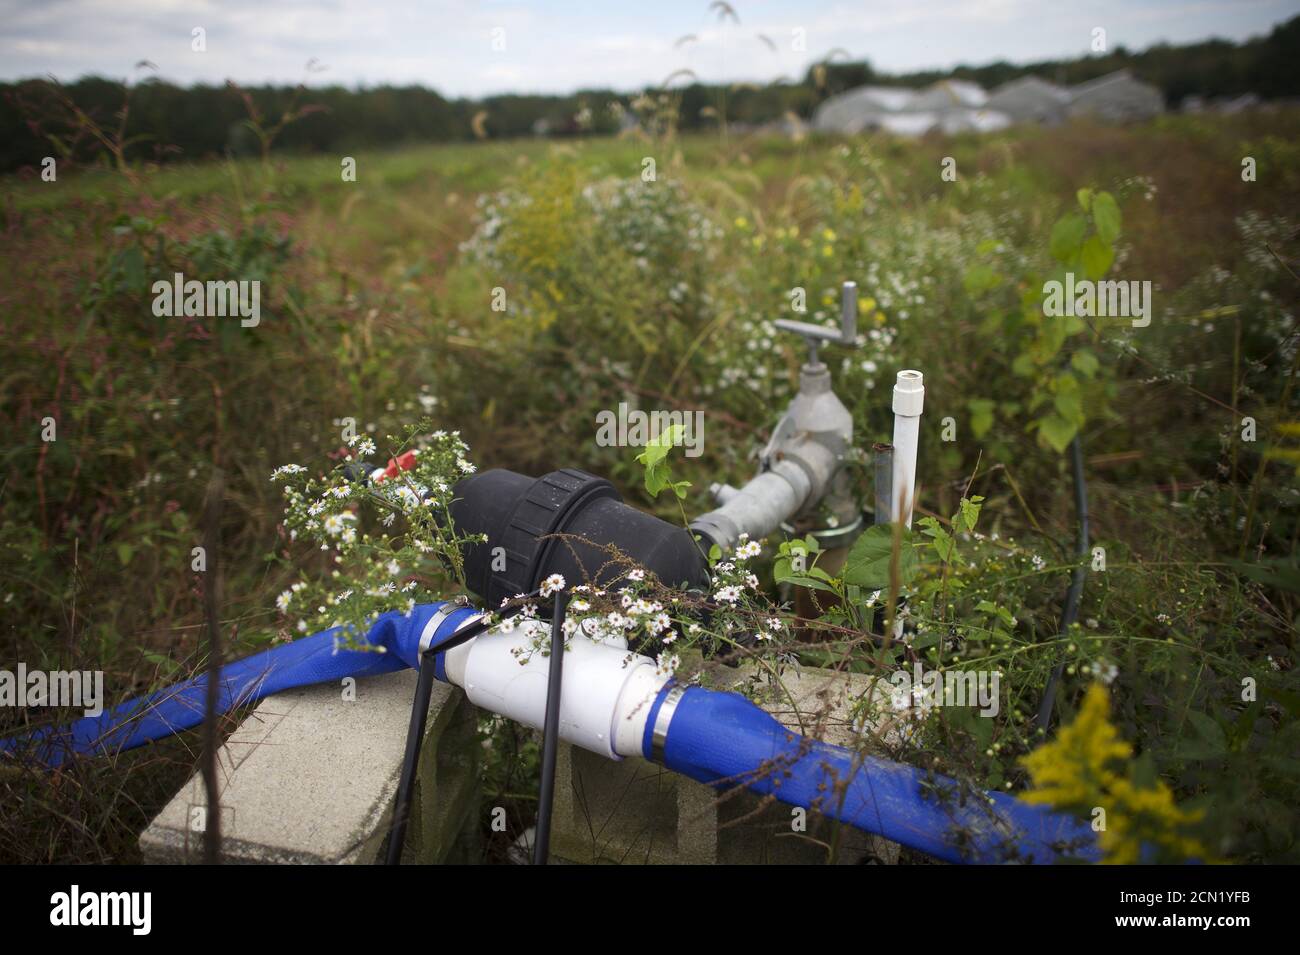 An irrigation pump is seen on the farm of Morris Gbolo, 57, originally from Liberia, in Vineland, New Jersey, October 9, 2015. New Jersey, officially nicknamed 'The Garden State' since 1954, is striving to revitalize its farming sector. It is seizing on trends such as the 'Eat Local' movement, agritourism and ethnic crops that appeal to a growing population of Asian, Hispanic and African residents, including those flocking to Gbolo's fields in Vineland. Picture taken October 9, 2015. To match Feature USA-AGRICULTURE/NEW JERSEY REUTERS/Mark Makela Stock Photo